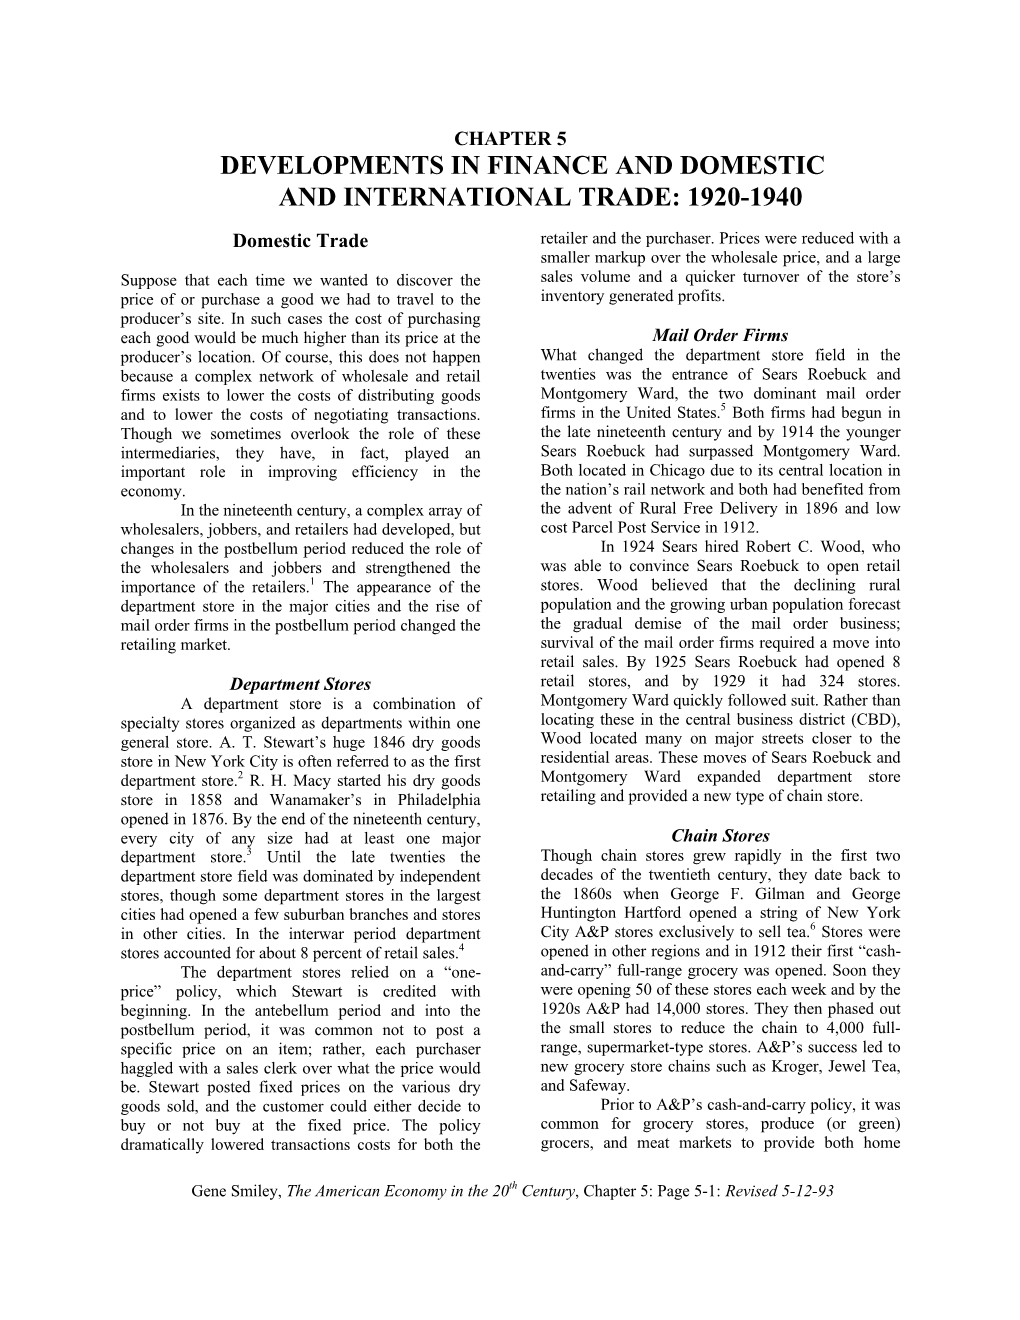 Developments in Finance and Domestic and International Trade: 1920-1940